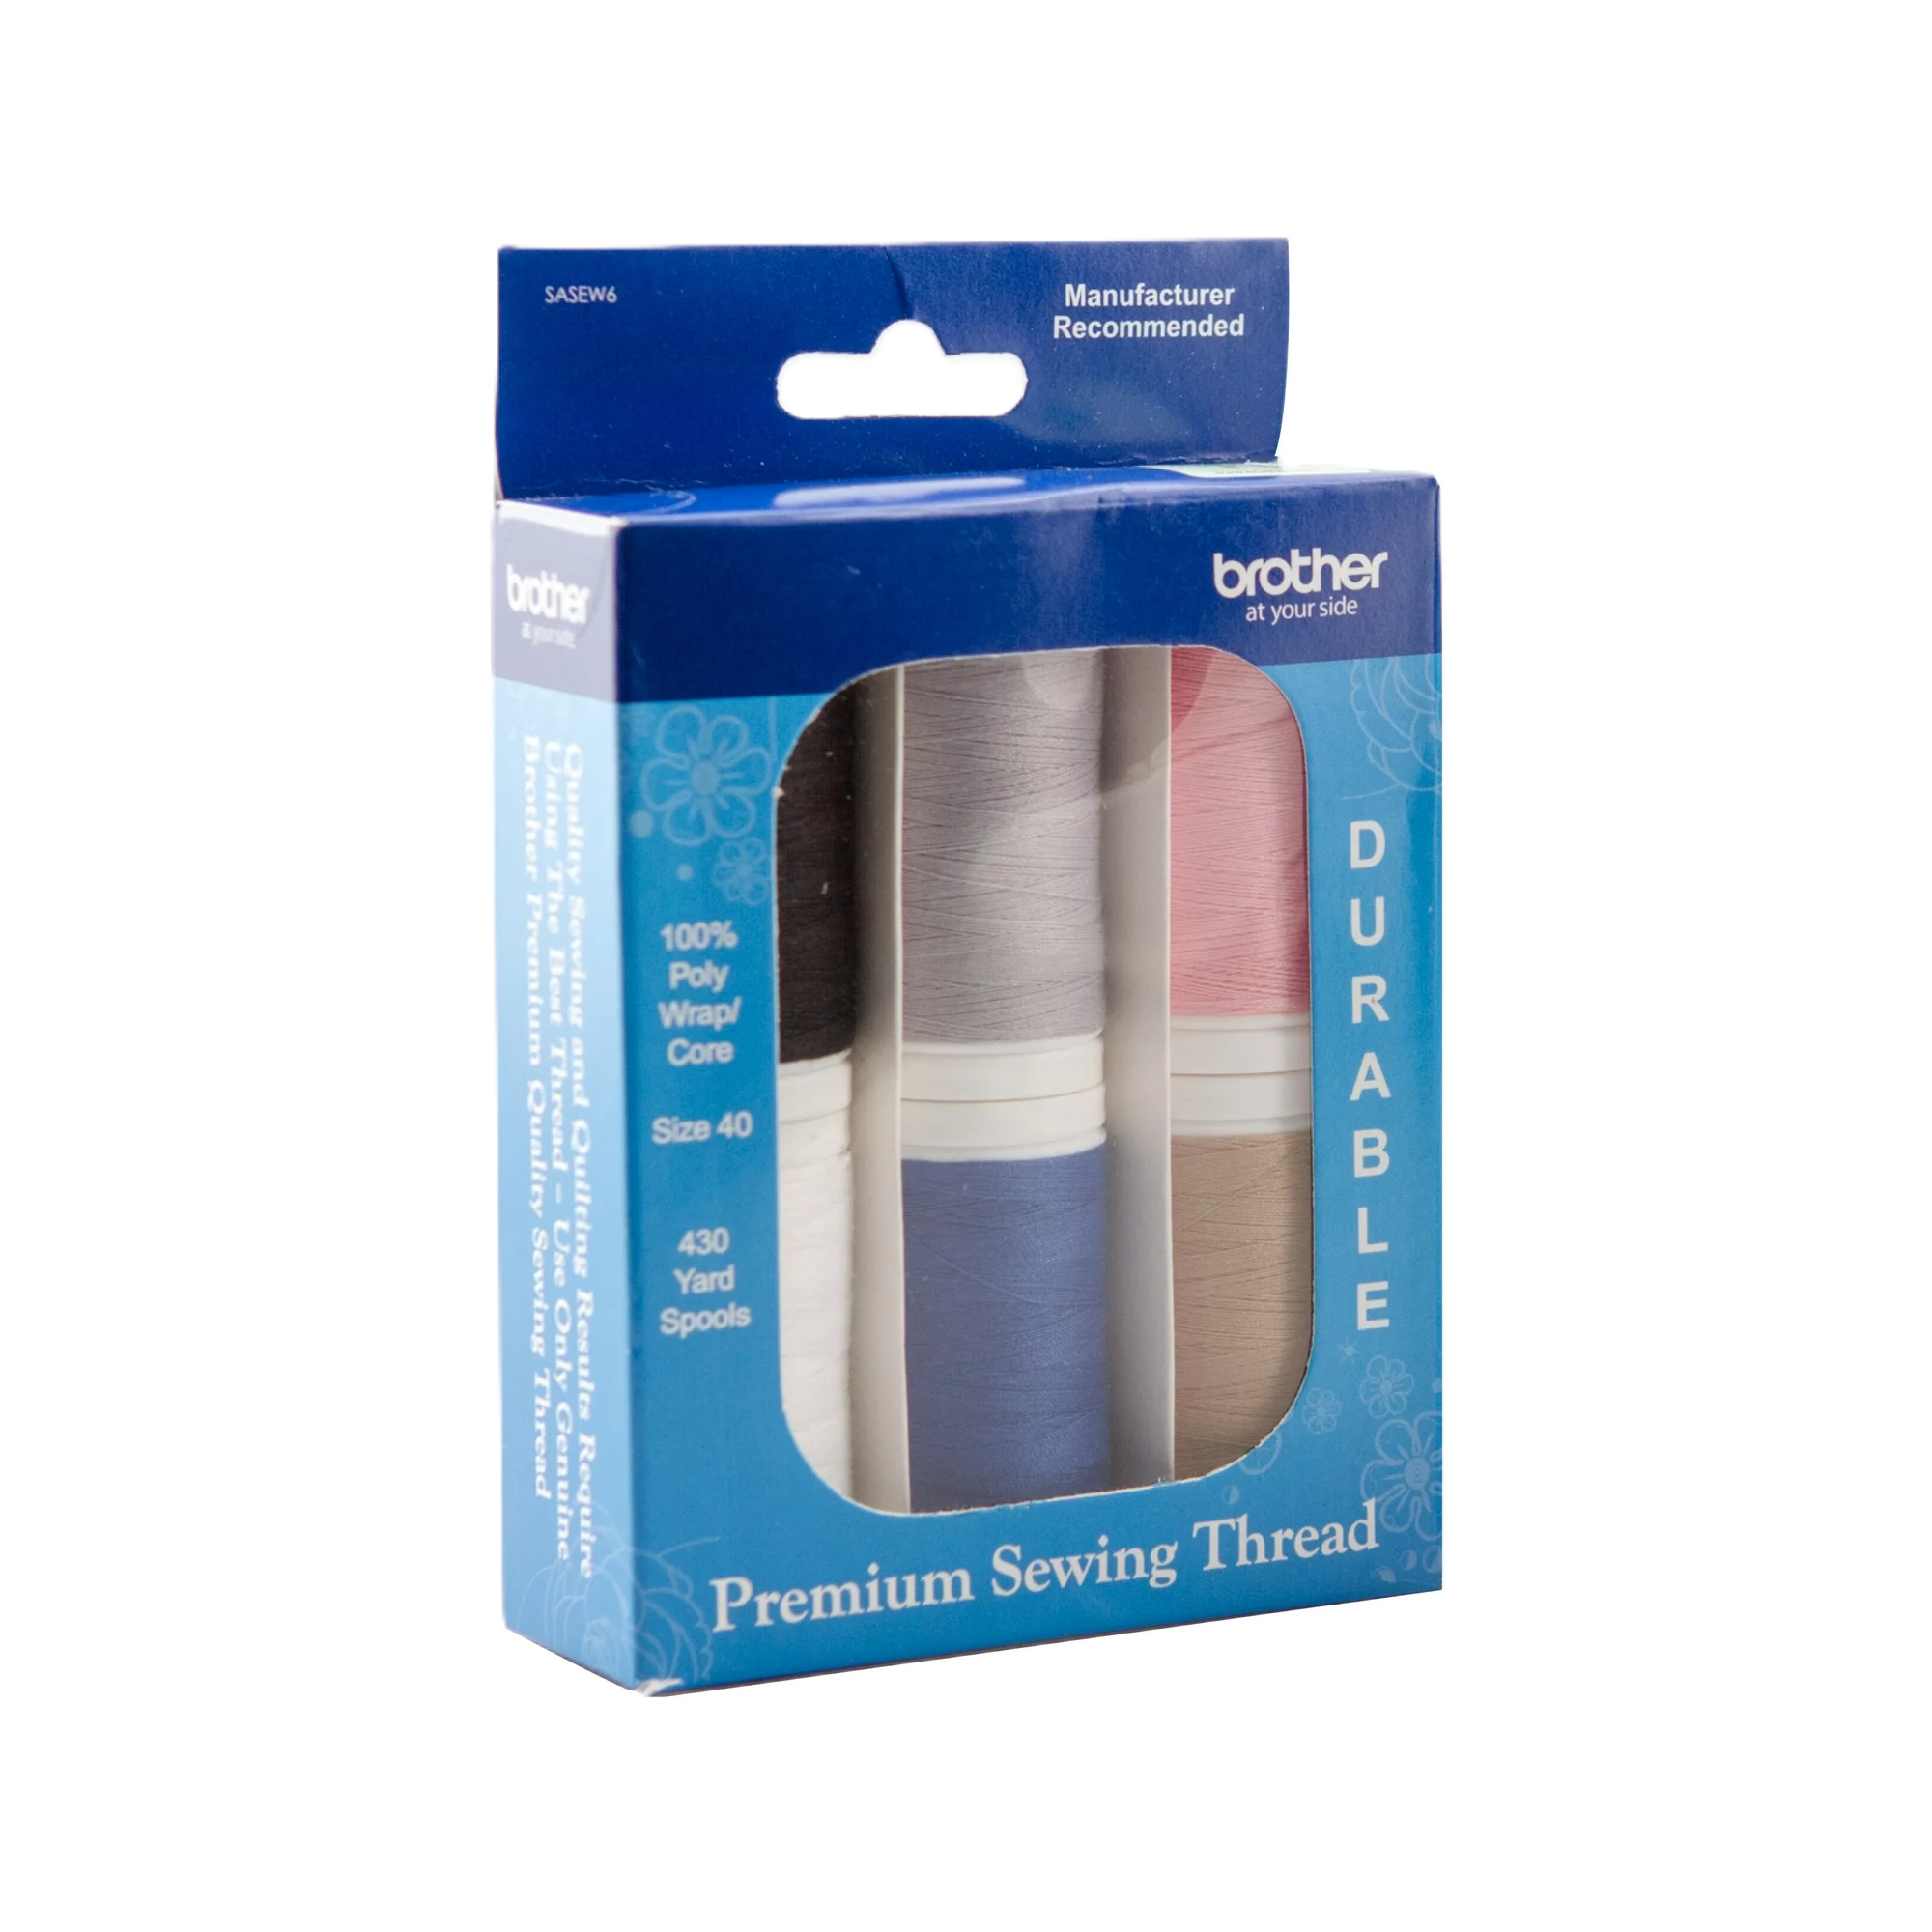 Brother 6pc Sewing Thread Kit SASEW6